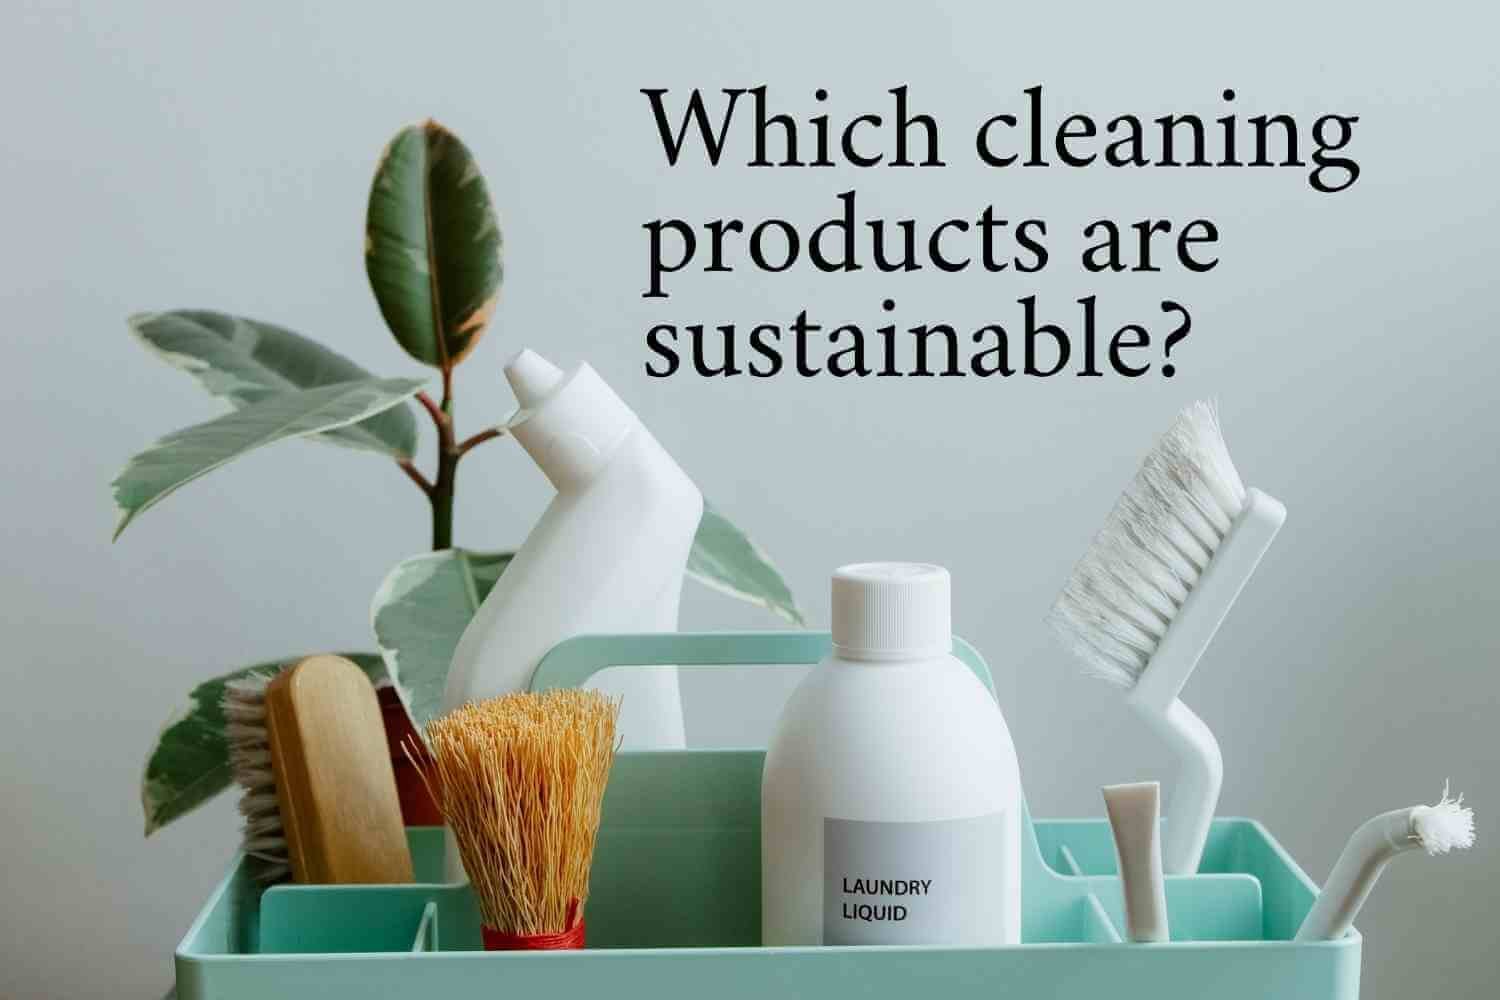 https://images.squarespace-cdn.com/content/v1/5bb8cd5aa09a7e4c80cb9fd8/4af09727-22da-4076-9703-128aecddadf6/best+eco+friendly+cleaning+products+%281%29.jpg